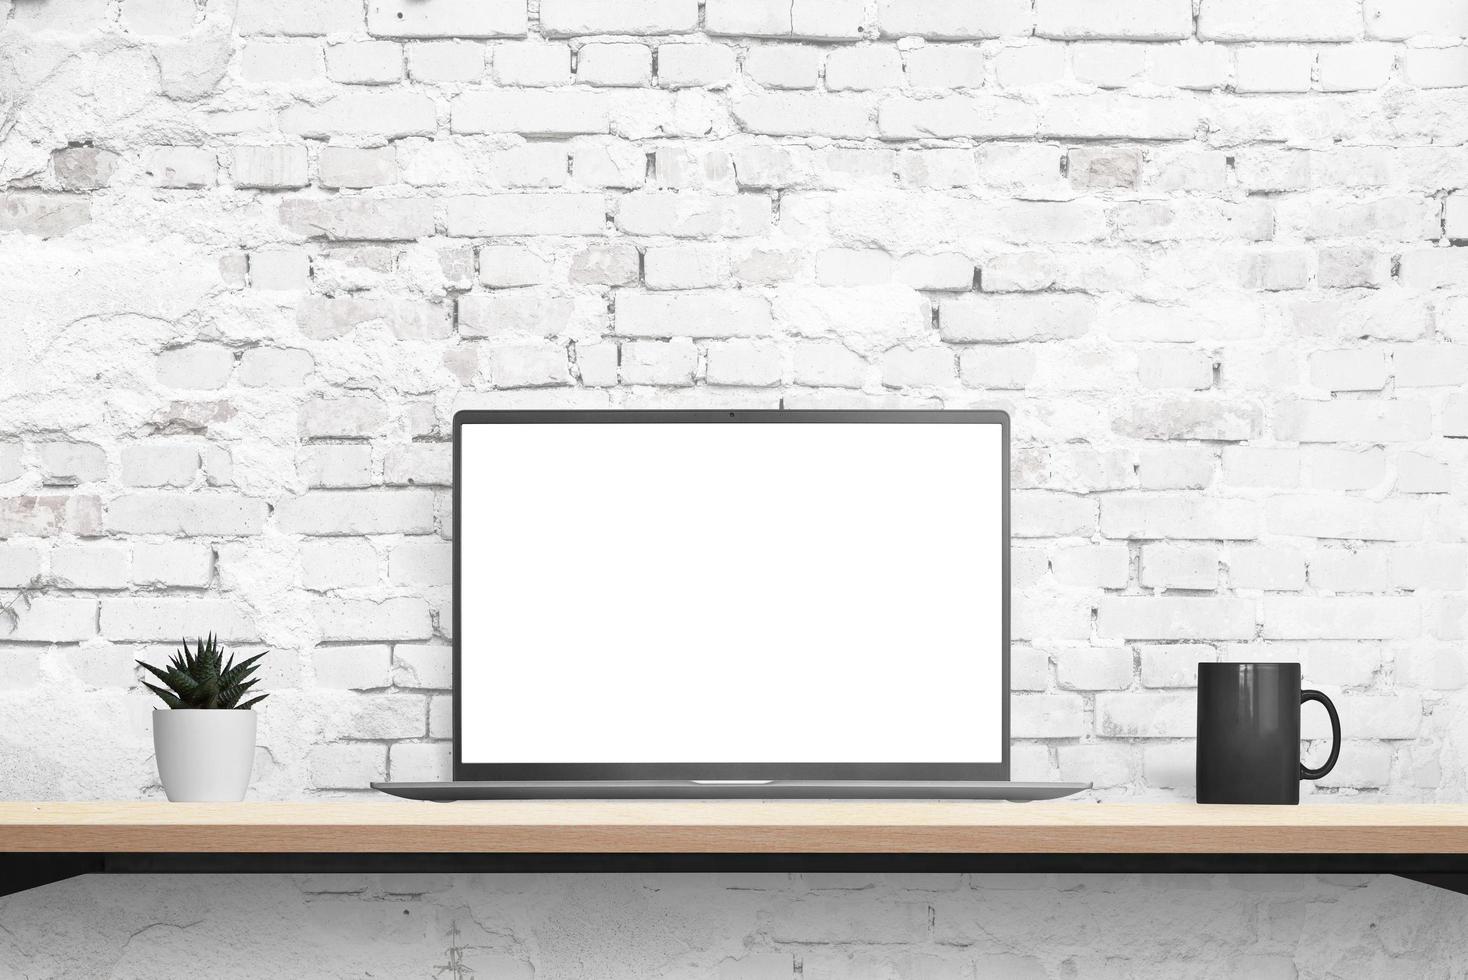 Laptop mockup on desk with brick wall in background. Isolated displaz in white for mockup, app or web page promotion. Plant and coffee mug beside. Front position photo